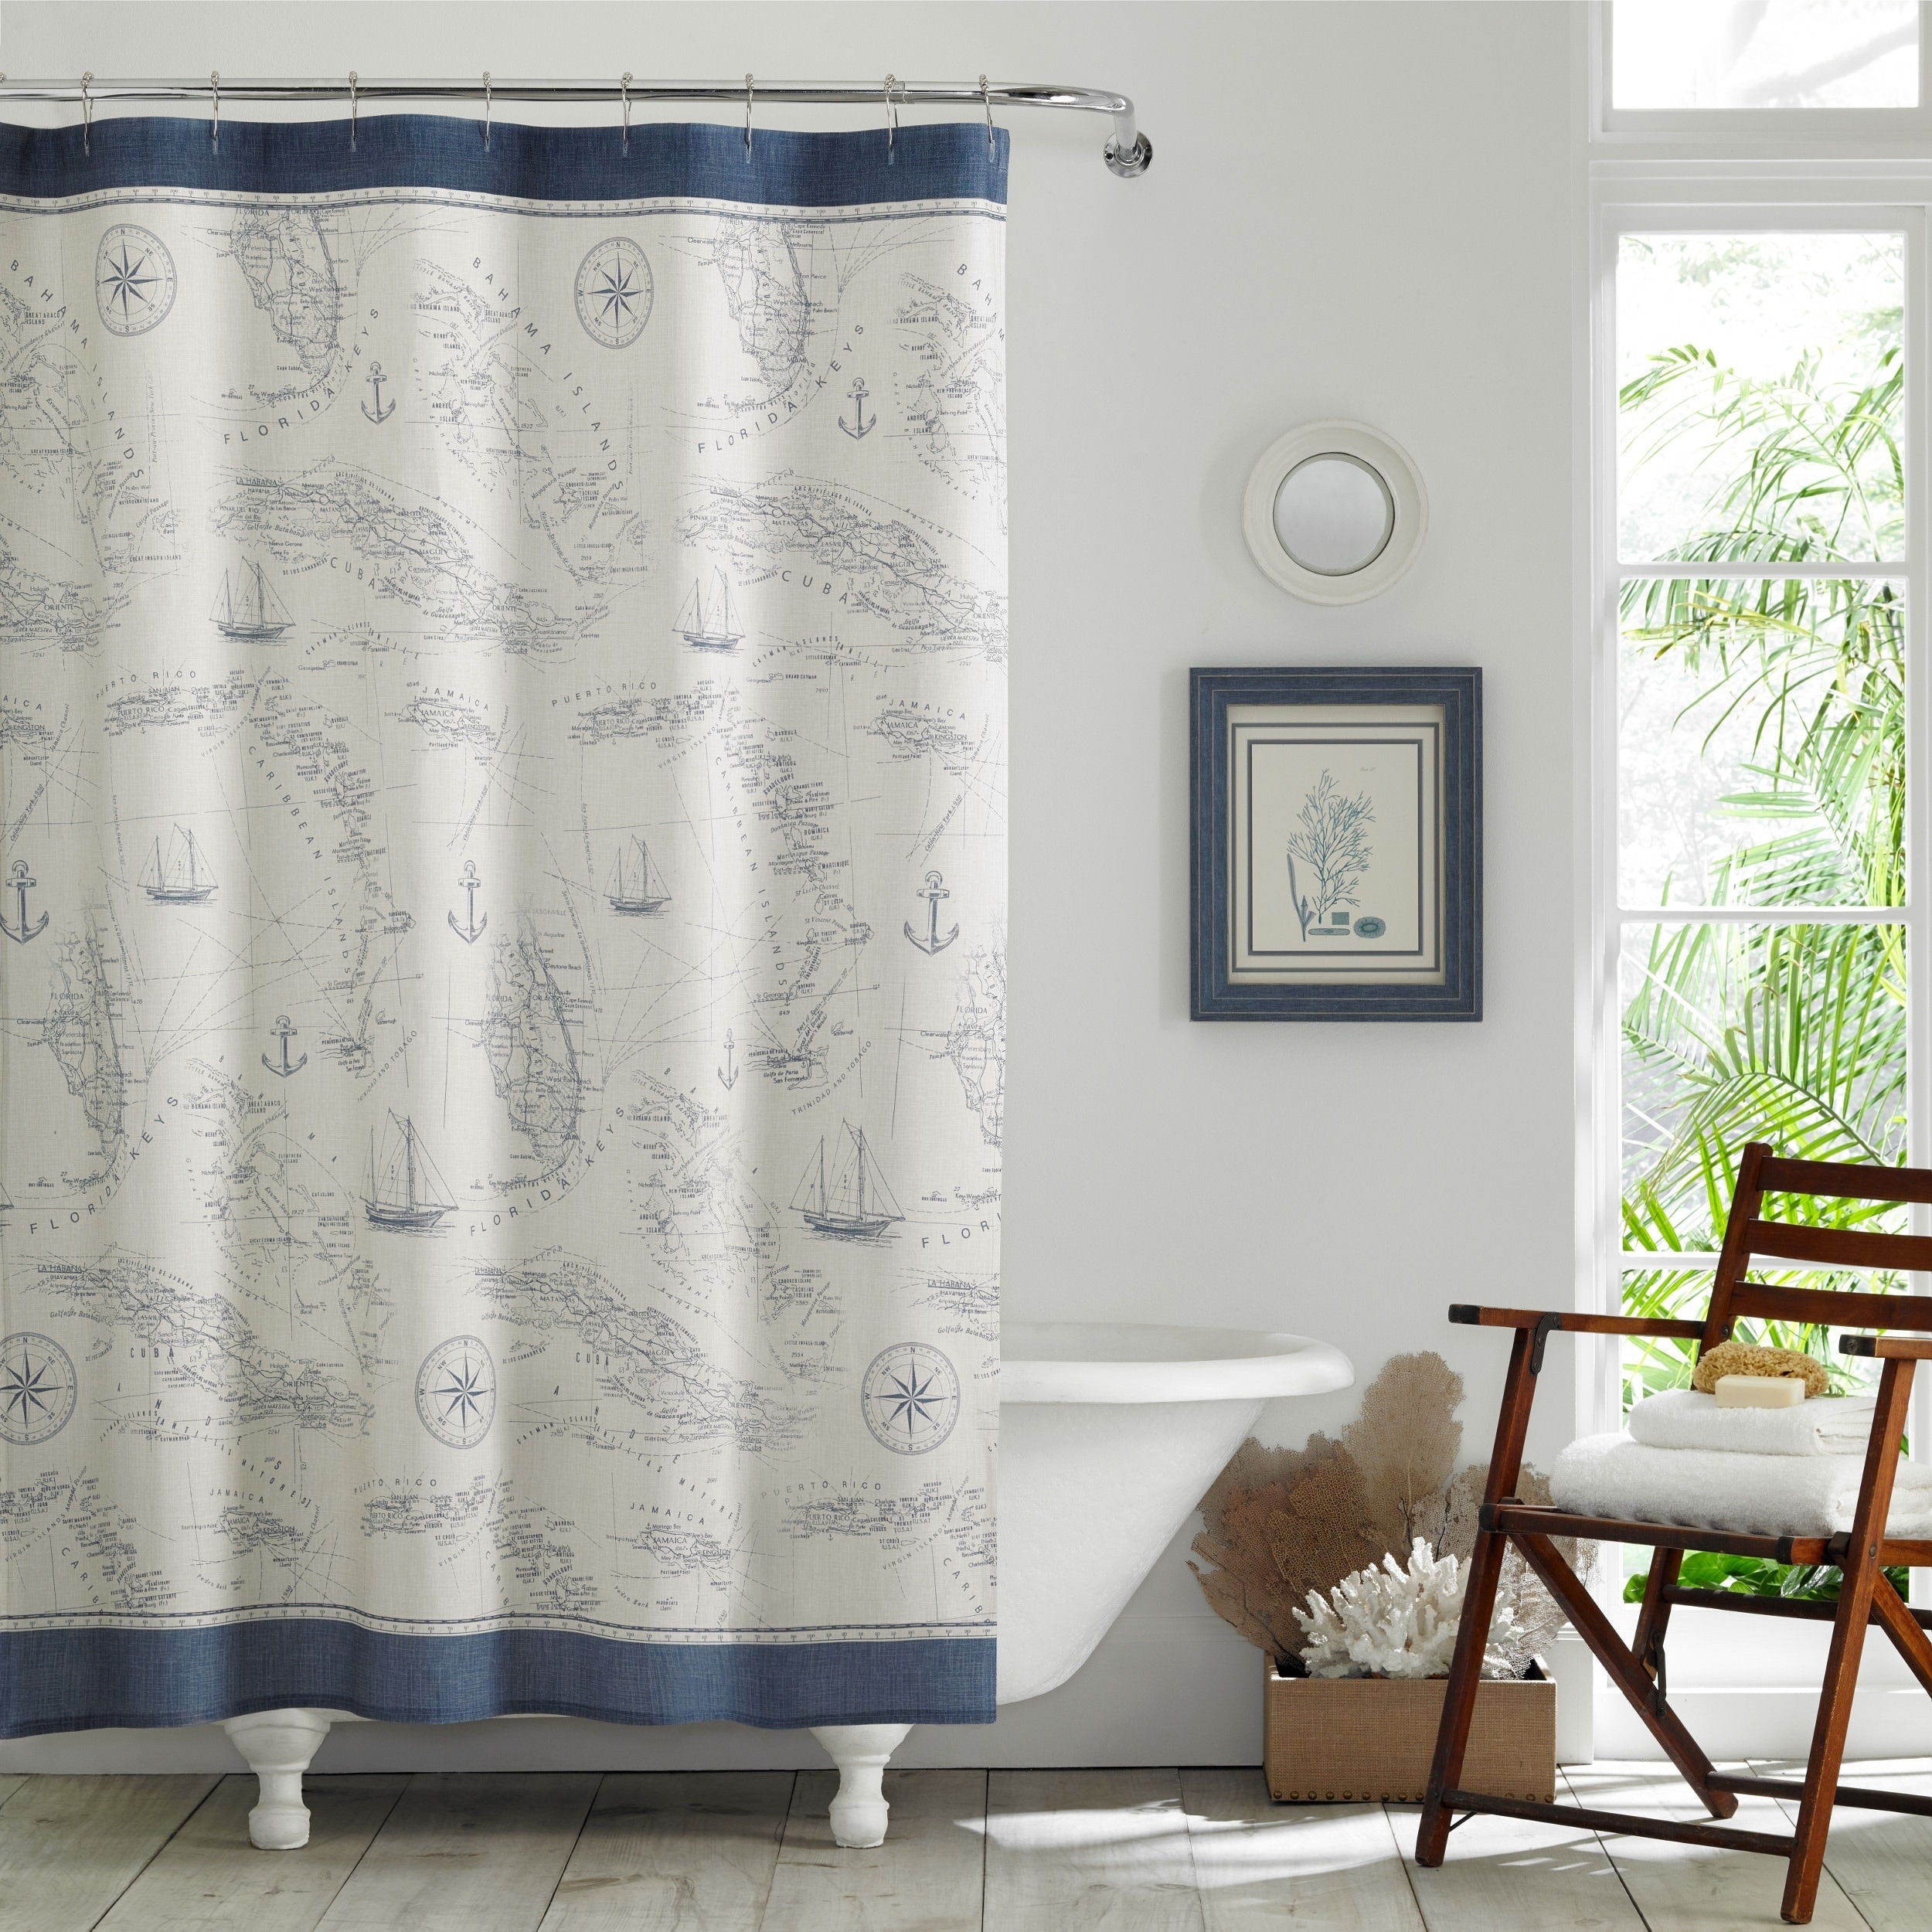 Tommy Bahama Caribbean Sea Shower Curtain - 72 in. x 72 in.